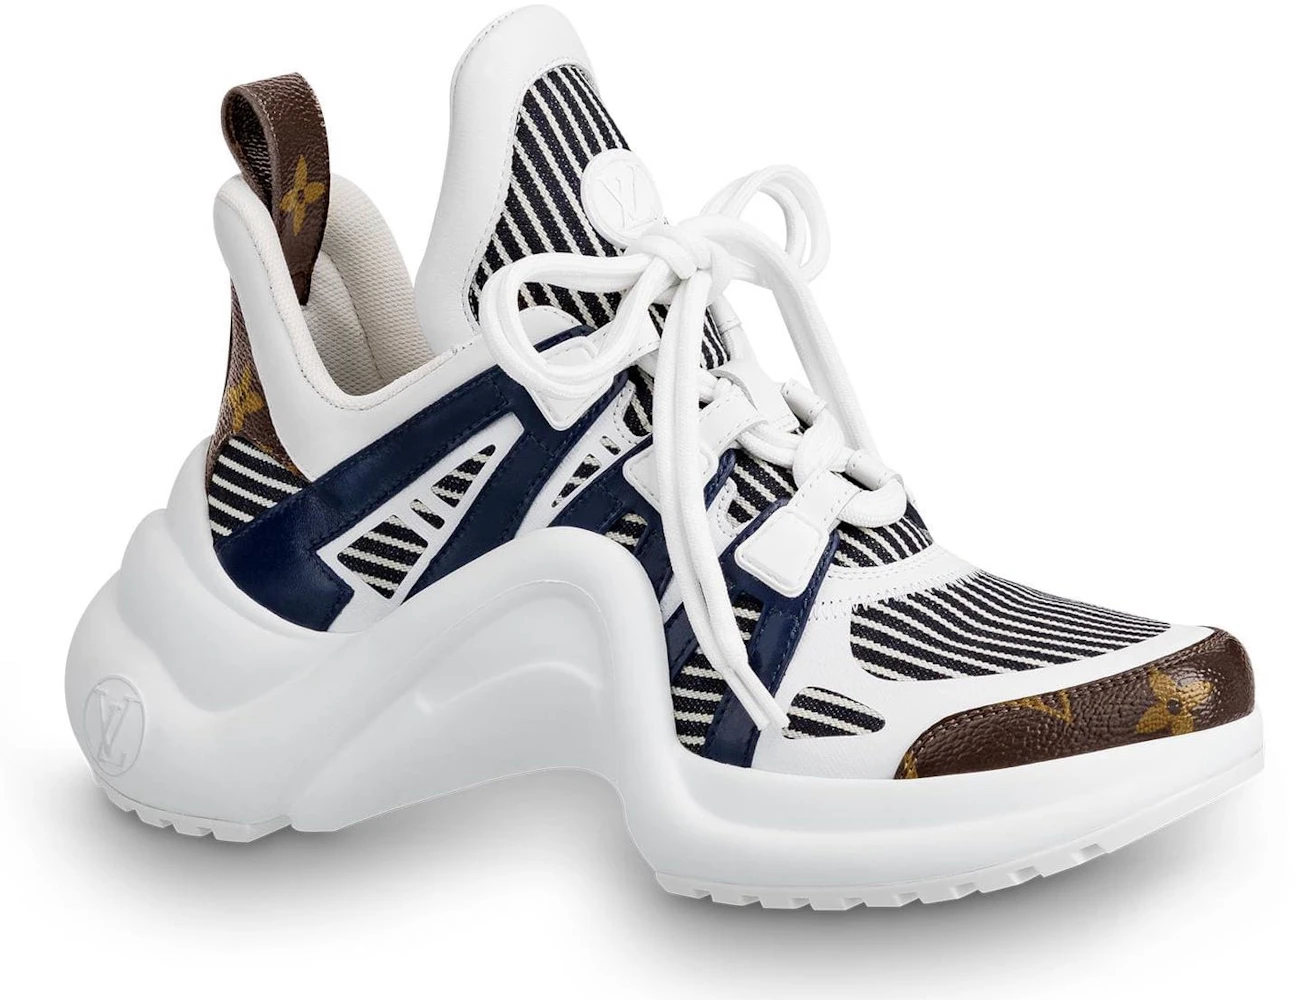 LV Archlight Trainers - Shoes 1AAW34